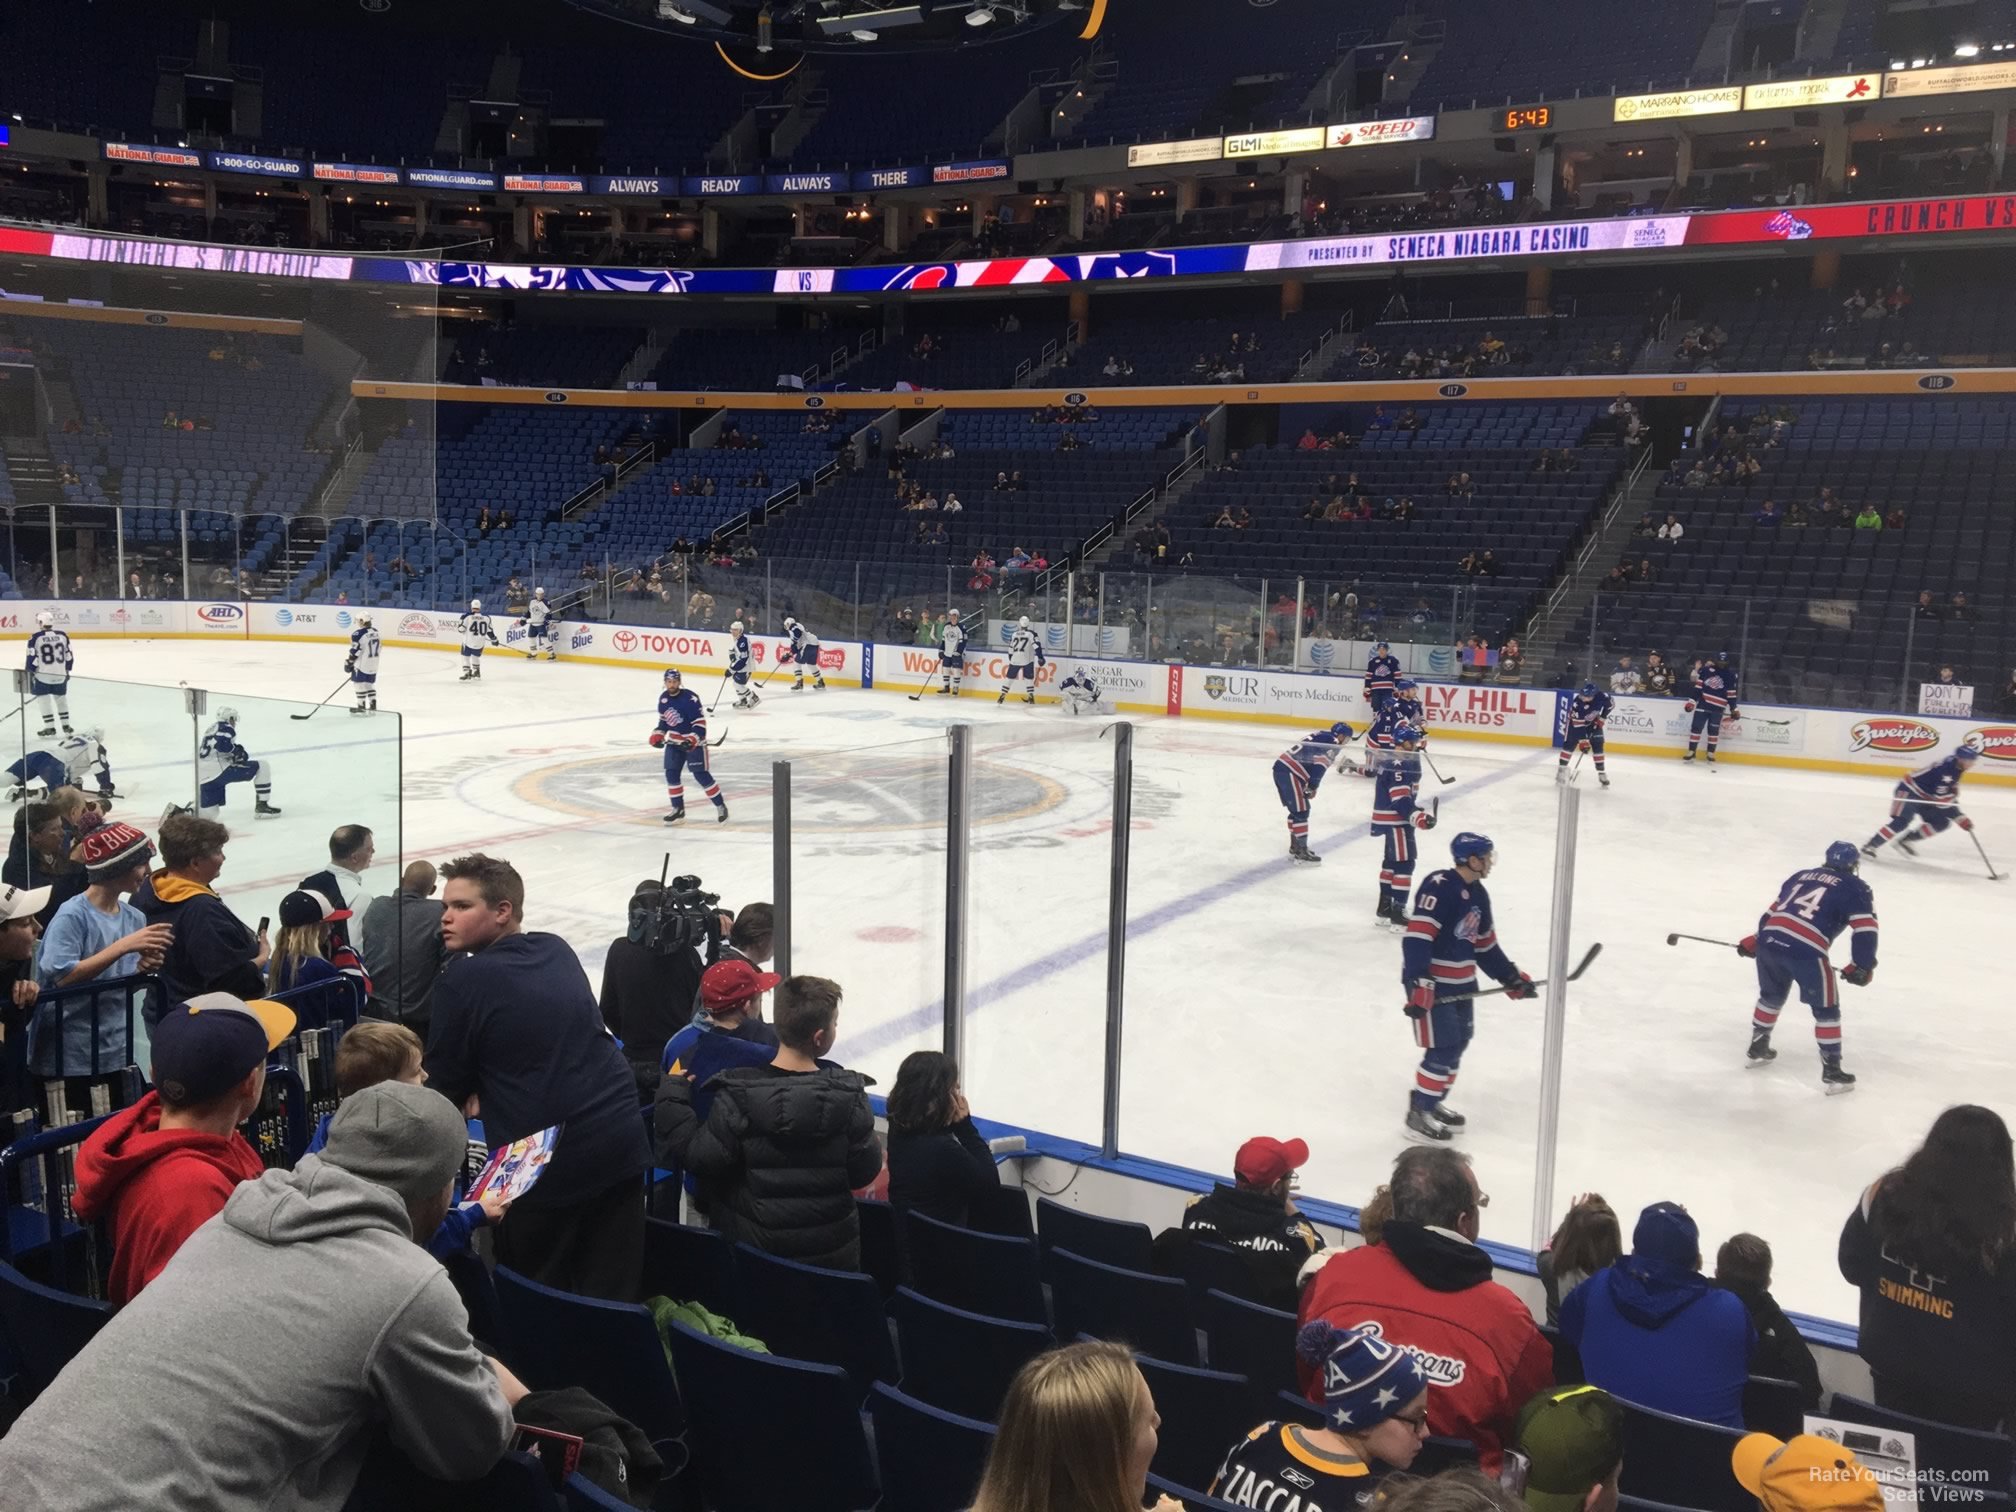 section 104, row 4 seat view  for hockey - keybank center